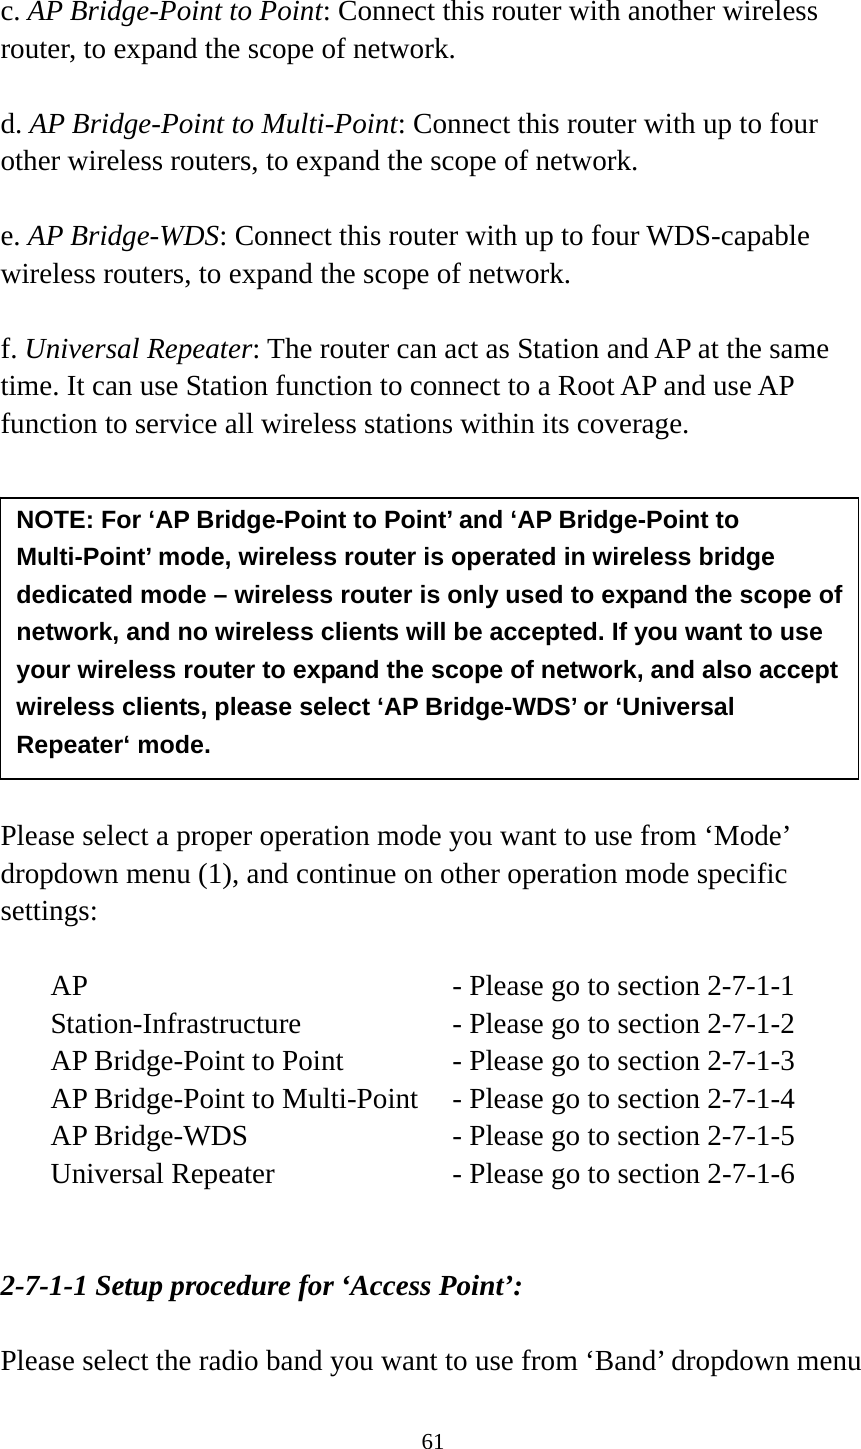 61  c. AP Bridge-Point to Point: Connect this router with another wireless router, to expand the scope of network.    d. AP Bridge-Point to Multi-Point: Connect this router with up to four other wireless routers, to expand the scope of network.  e. AP Bridge-WDS: Connect this router with up to four WDS-capable wireless routers, to expand the scope of network.  f. Universal Repeater: The router can act as Station and AP at the same time. It can use Station function to connect to a Root AP and use AP function to service all wireless stations within its coverage.           Please select a proper operation mode you want to use from ‘Mode’ dropdown menu (1), and continue on other operation mode specific settings:  AP        - Please go to section 2-7-1-1 Station-Infrastructure        - Please go to section 2-7-1-2 AP Bridge-Point to Point     - Please go to section 2-7-1-3 AP Bridge-Point to Multi-Point  - Please go to section 2-7-1-4 AP Bridge-WDS         - Please go to section 2-7-1-5 Universal Repeater          - Please go to section 2-7-1-6   2-7-1-1 Setup procedure for ‘Access Point’:  Please select the radio band you want to use from ‘Band’ dropdown menu NOTE: For ‘AP Bridge-Point to Point’ and ‘AP Bridge-Point to Multi-Point’ mode, wireless router is operated in wireless bridge dedicated mode – wireless router is only used to expand the scope of network, and no wireless clients will be accepted. If you want to use your wireless router to expand the scope of network, and also accept wireless clients, please select ‘AP Bridge-WDS’ or ‘Universal Repeater‘ mode. 